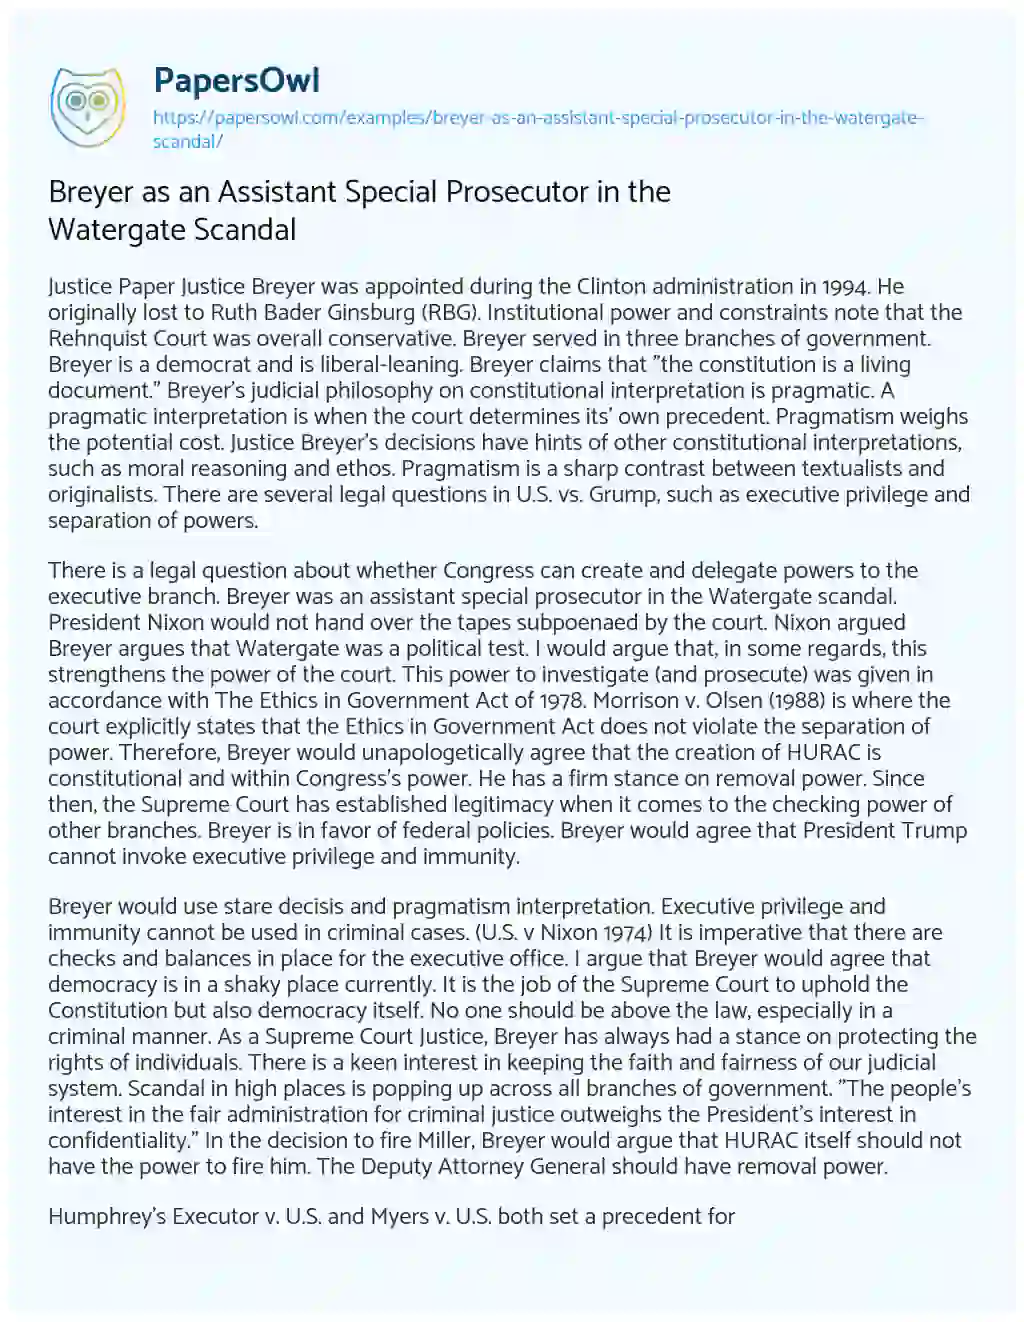 Essay on Breyer as an Assistant Special Prosecutor in the Watergate Scandal